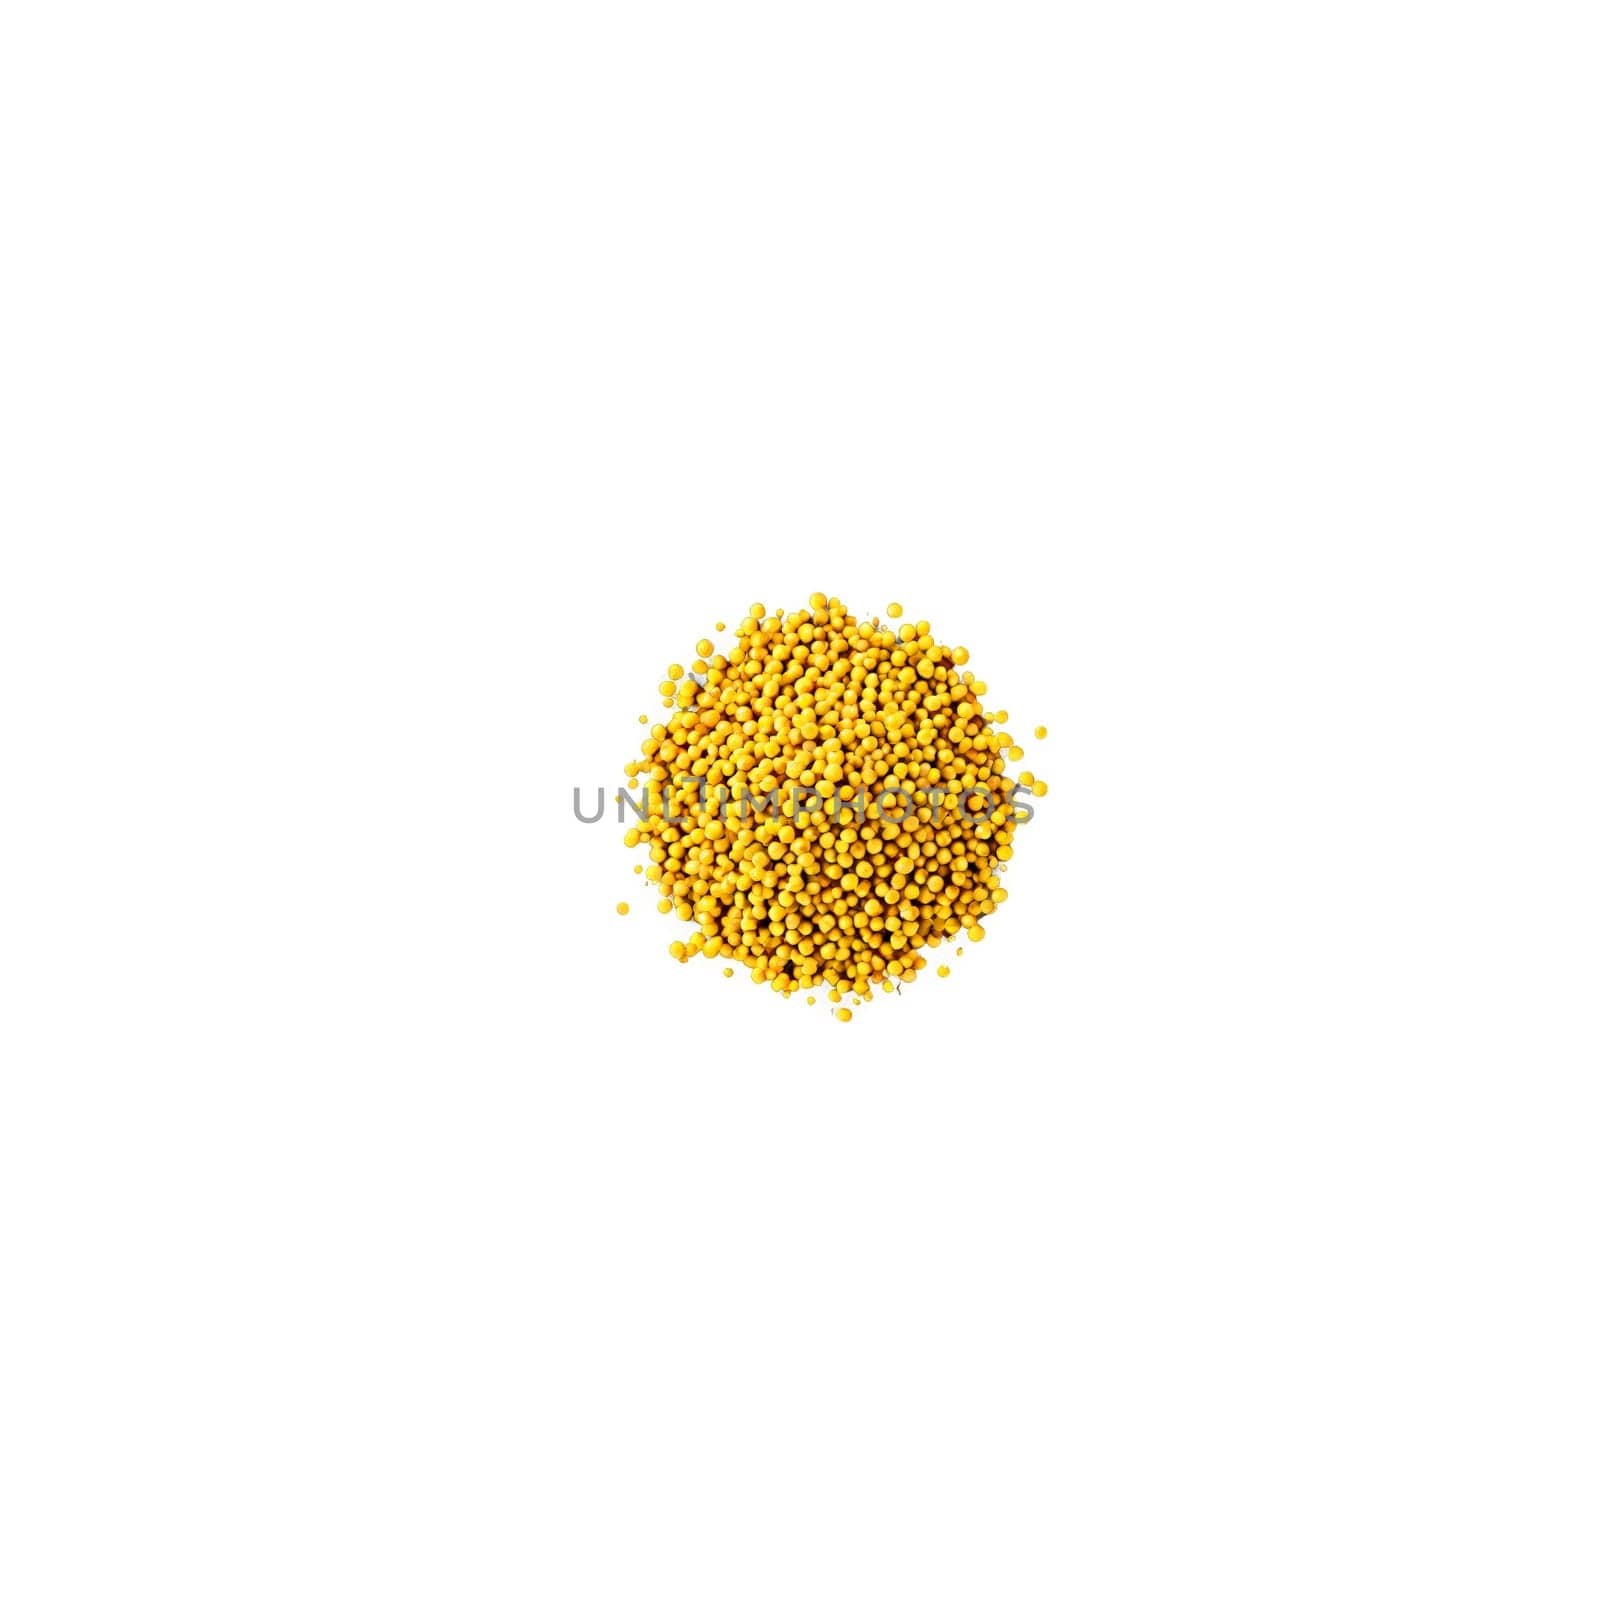 Whole yellow mustard seeds tiny spheres vibrant yellow color uniform size Food and culinary concept. Food isolated on transparent background.